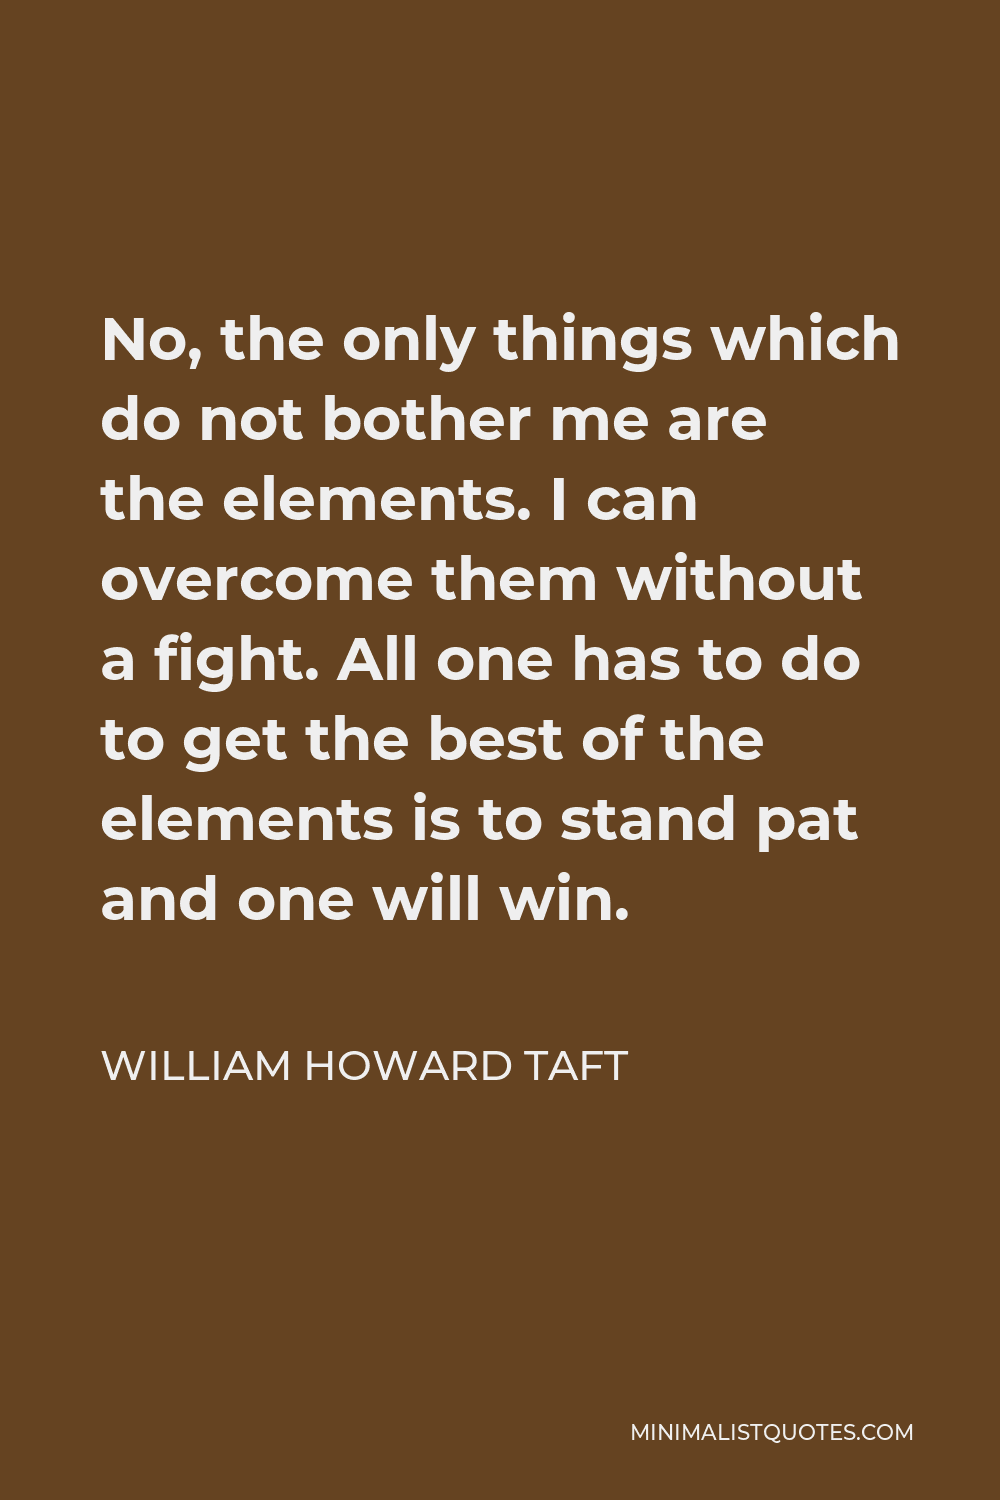 William Howard Taft Quote - No, the only things which do not bother me are the elements. I can overcome them without a fight. All one has to do to get the best of the elements is to stand pat and one will win.